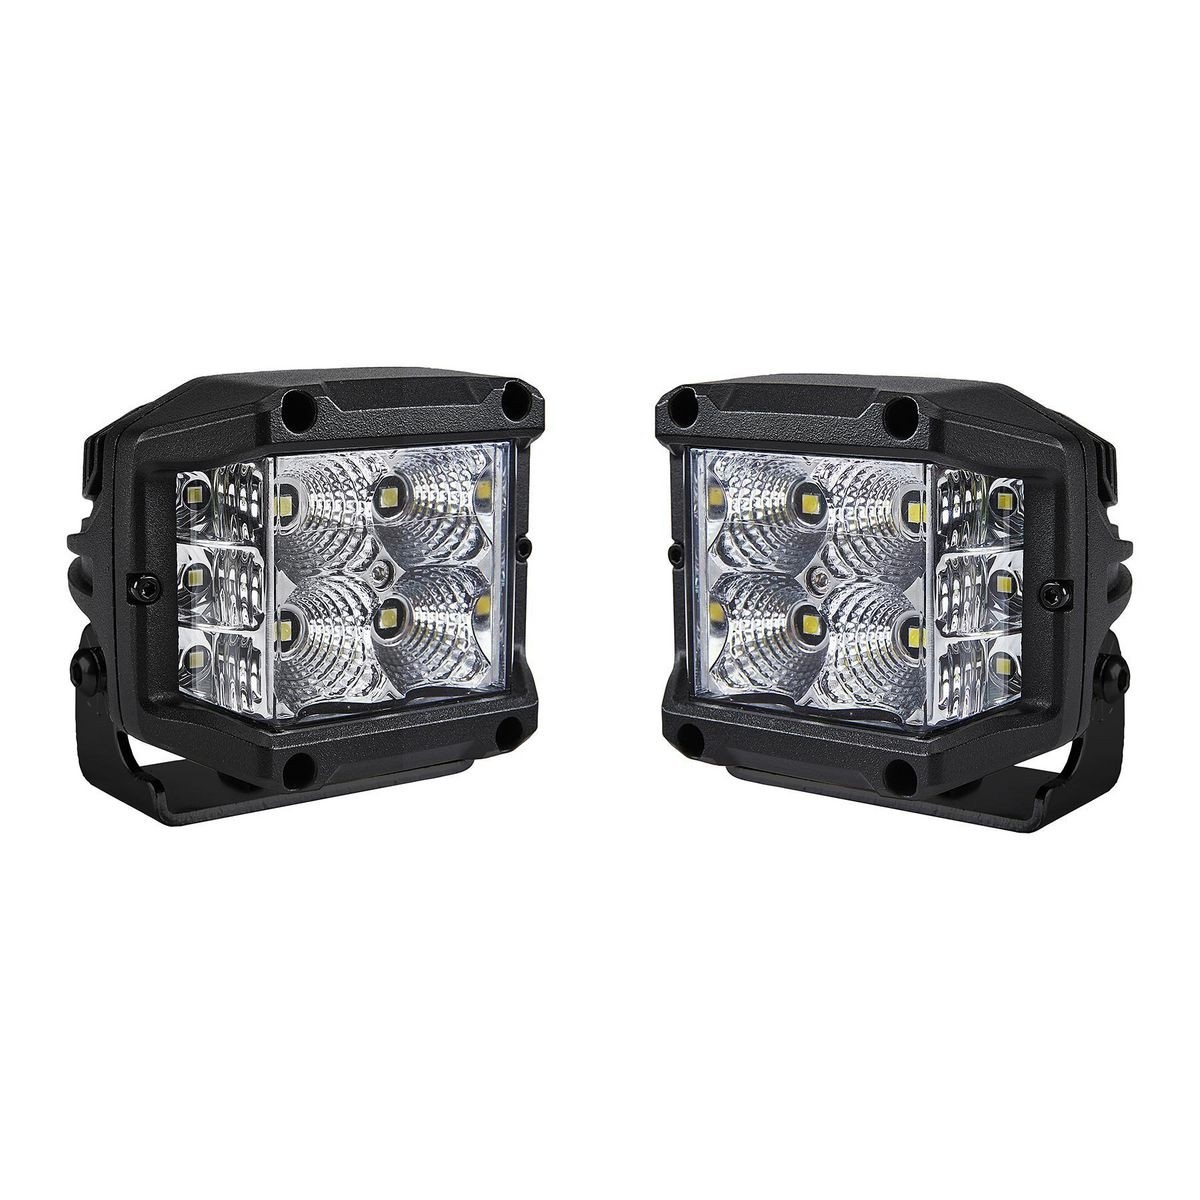 ROADSHOCK 3 In. LED Flood With Side Light – Pair – Item 57539